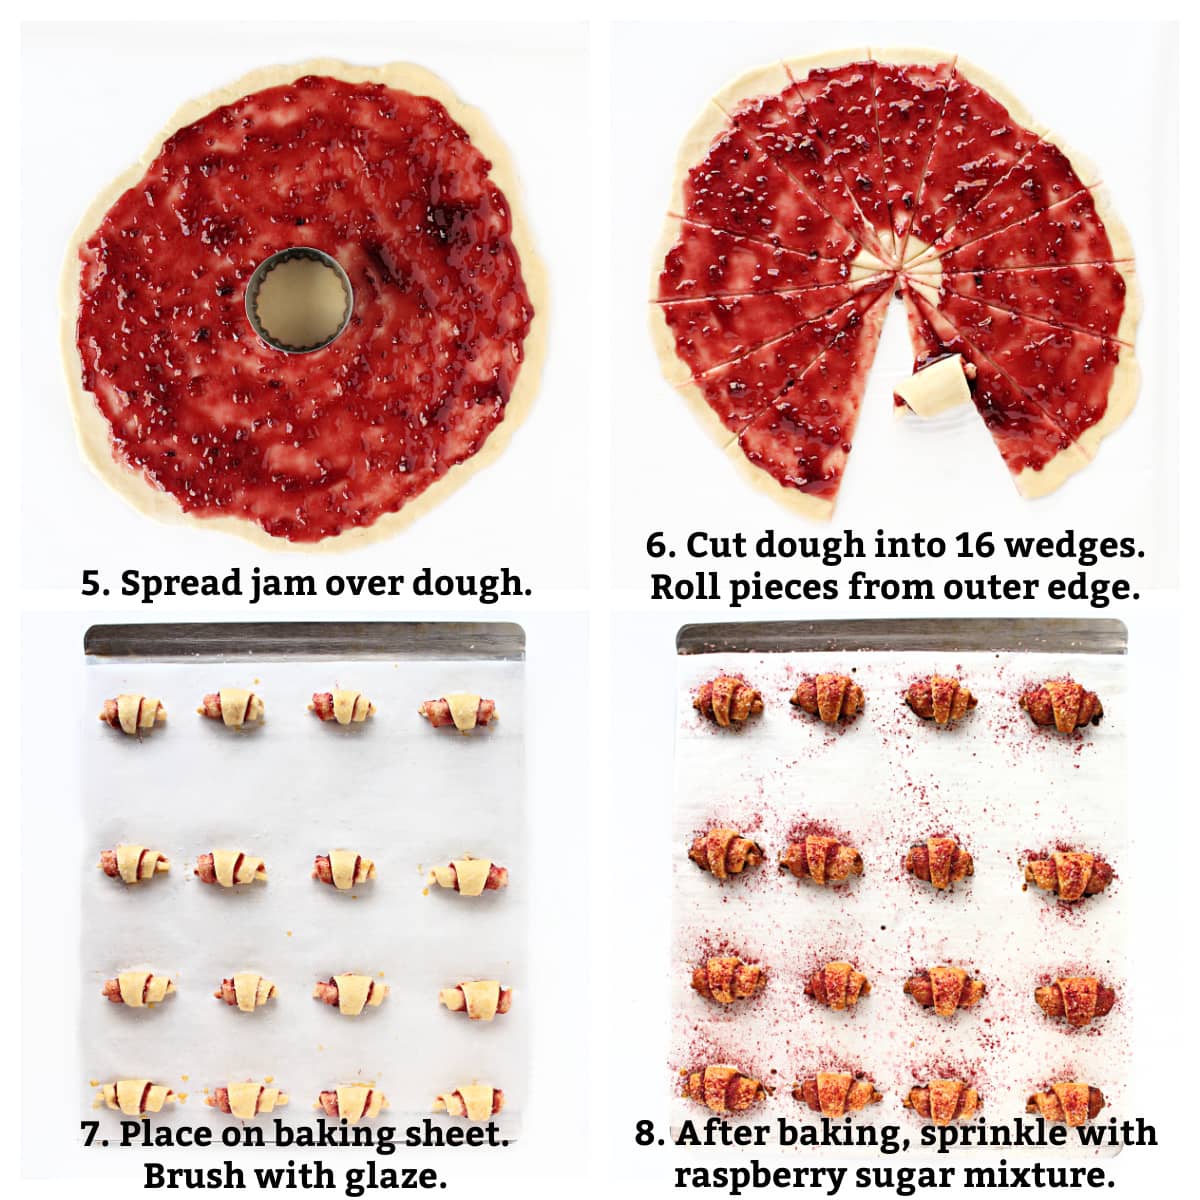 Instructions: spread jam on dough, cut into wedges, roll into crescent cookies, egg glaze, bake, sprinkle.